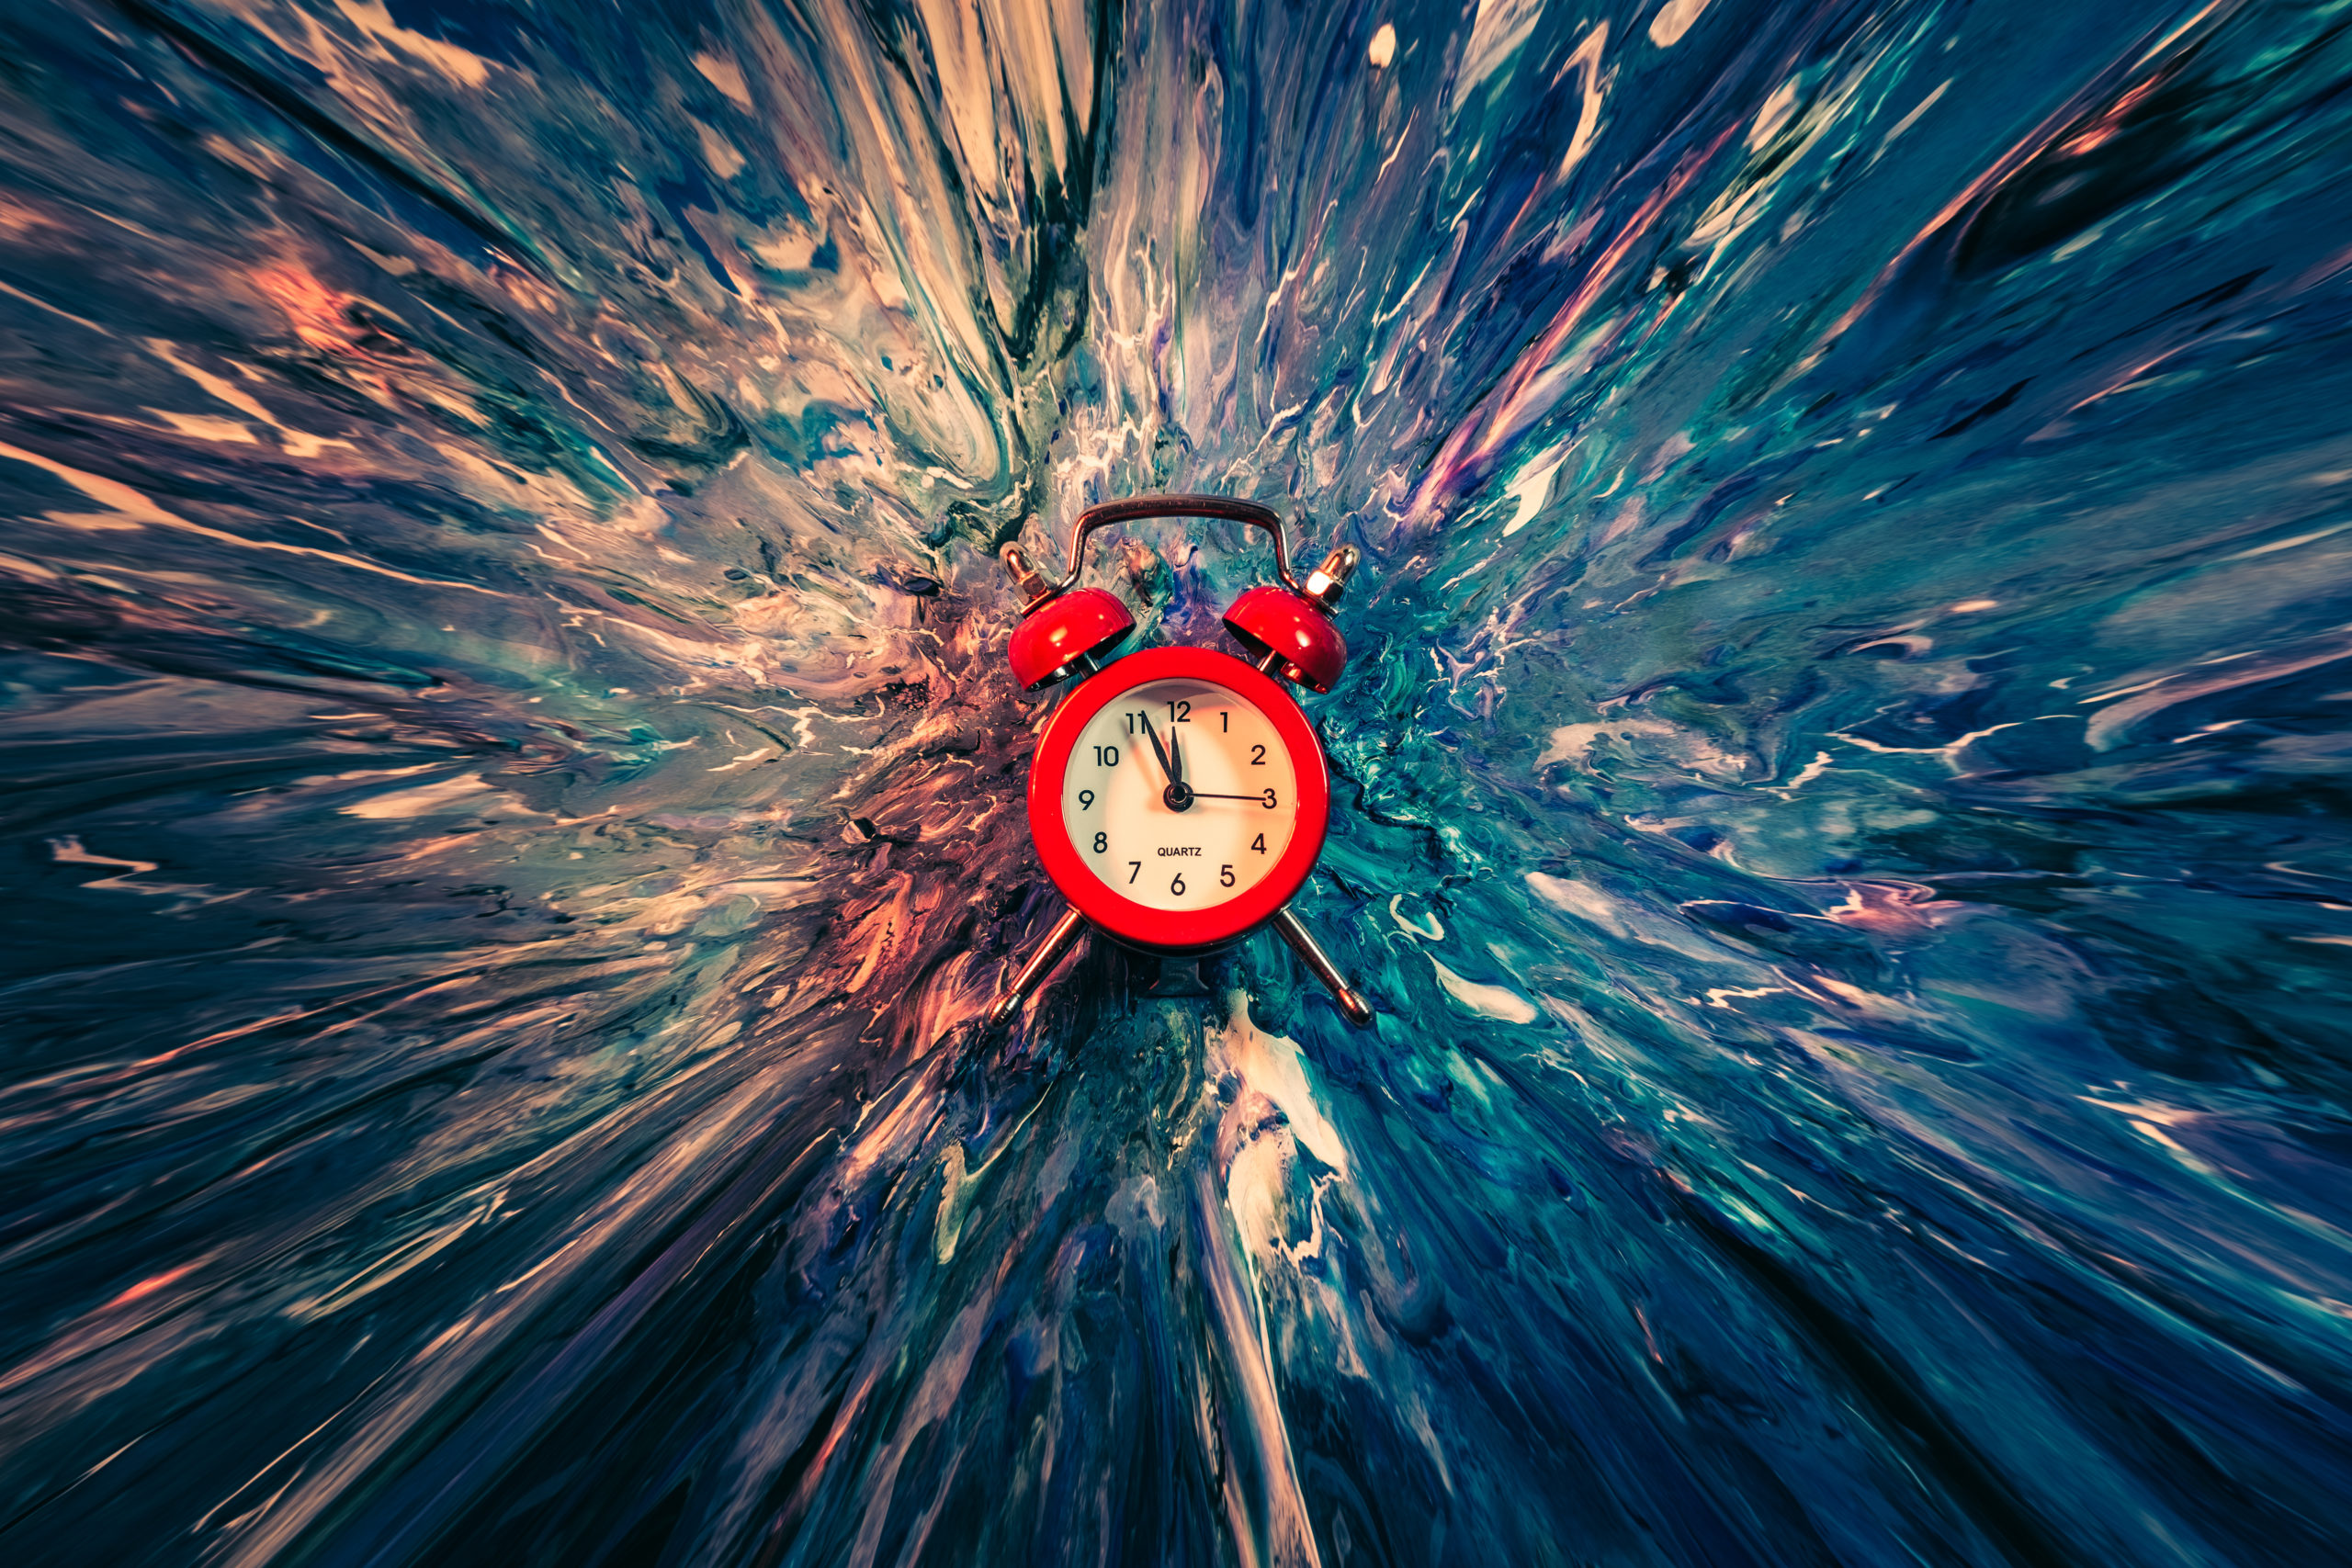 Time flies. Red vintage alarm clock falling down into blue and white paint with splash effect. Abstract art background.